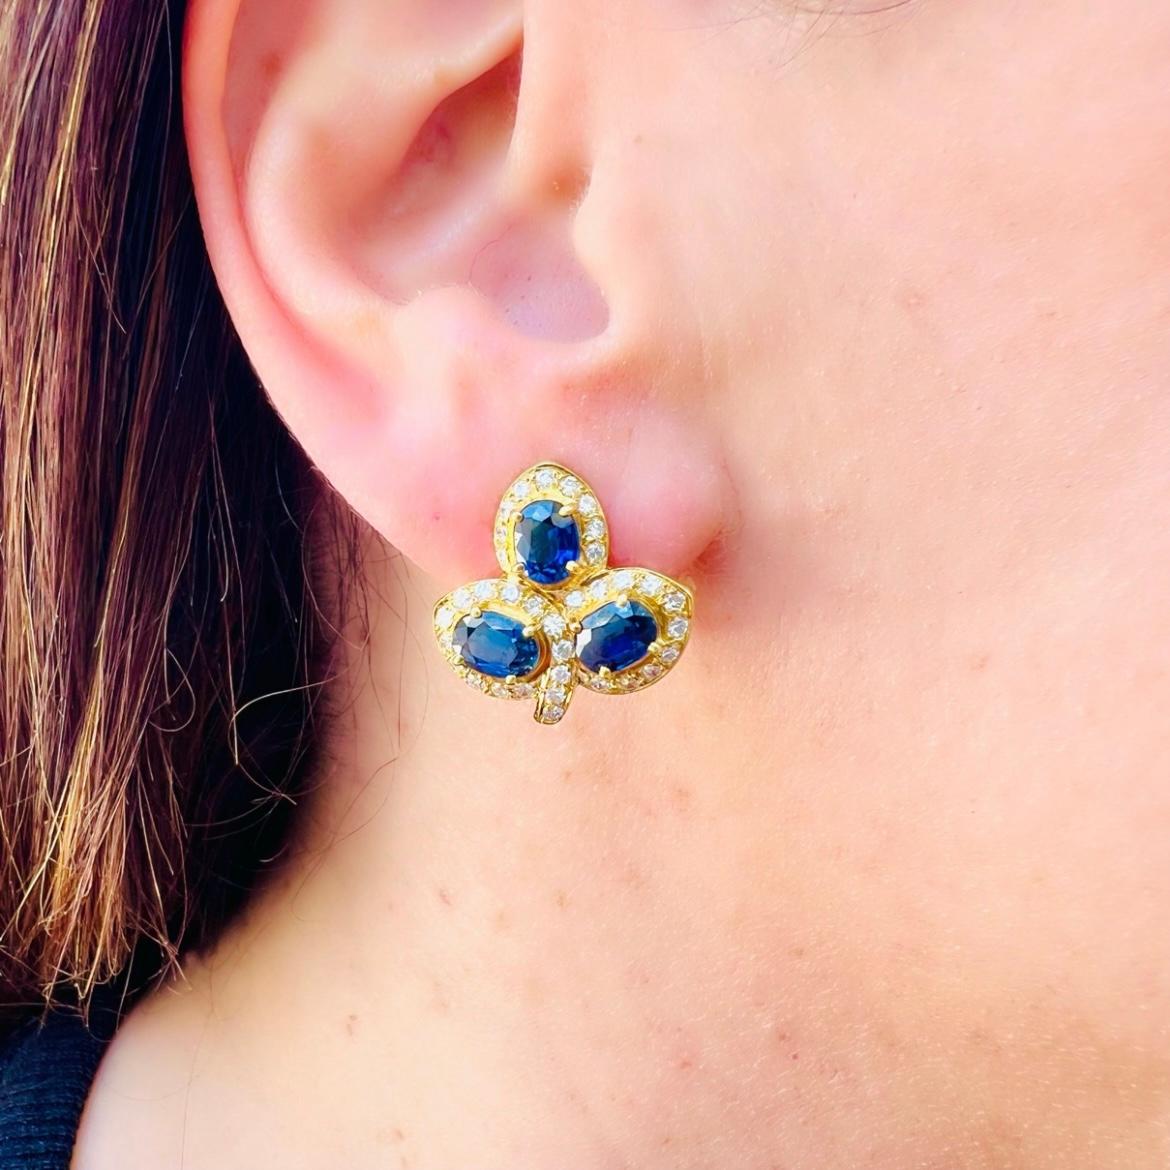 Circa 1970's, these floral designed sapphire and diamond earrings are every bit as in fashion now as when they were originally created. Featuring six sapphires (three in each ear) for approximately 3.96 carats total weight, each petal of this floral